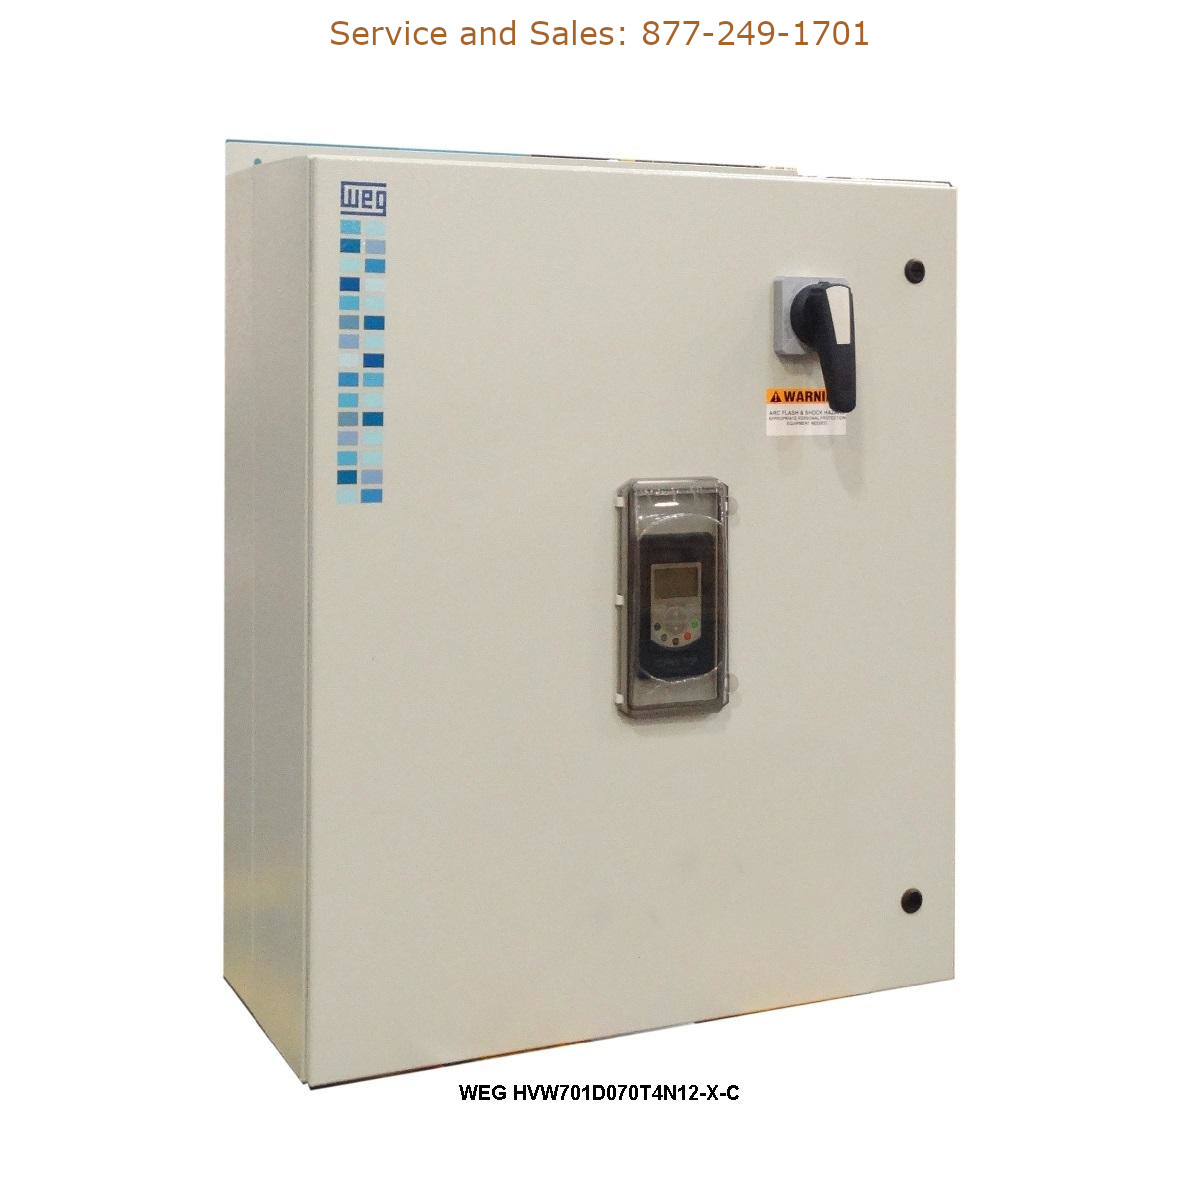 WEG HVW701D070T4N12-X-C WEG Model Number HVW701D070T4N12-X-C WEG Drives, Variable Speed Drives Repair Service, Troubleshooting, Replacement Parts https://gesrepair.com/wp-content/uploads/2022/WEG/WEG_HVW701D070T4N12-X-C_Drives_Variable_Speed_Drives.jpg